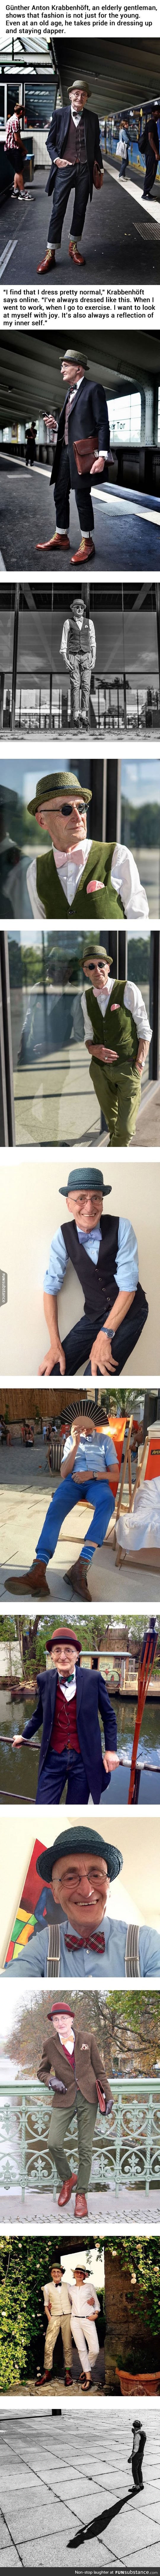 The classy grandpa that has more style than you